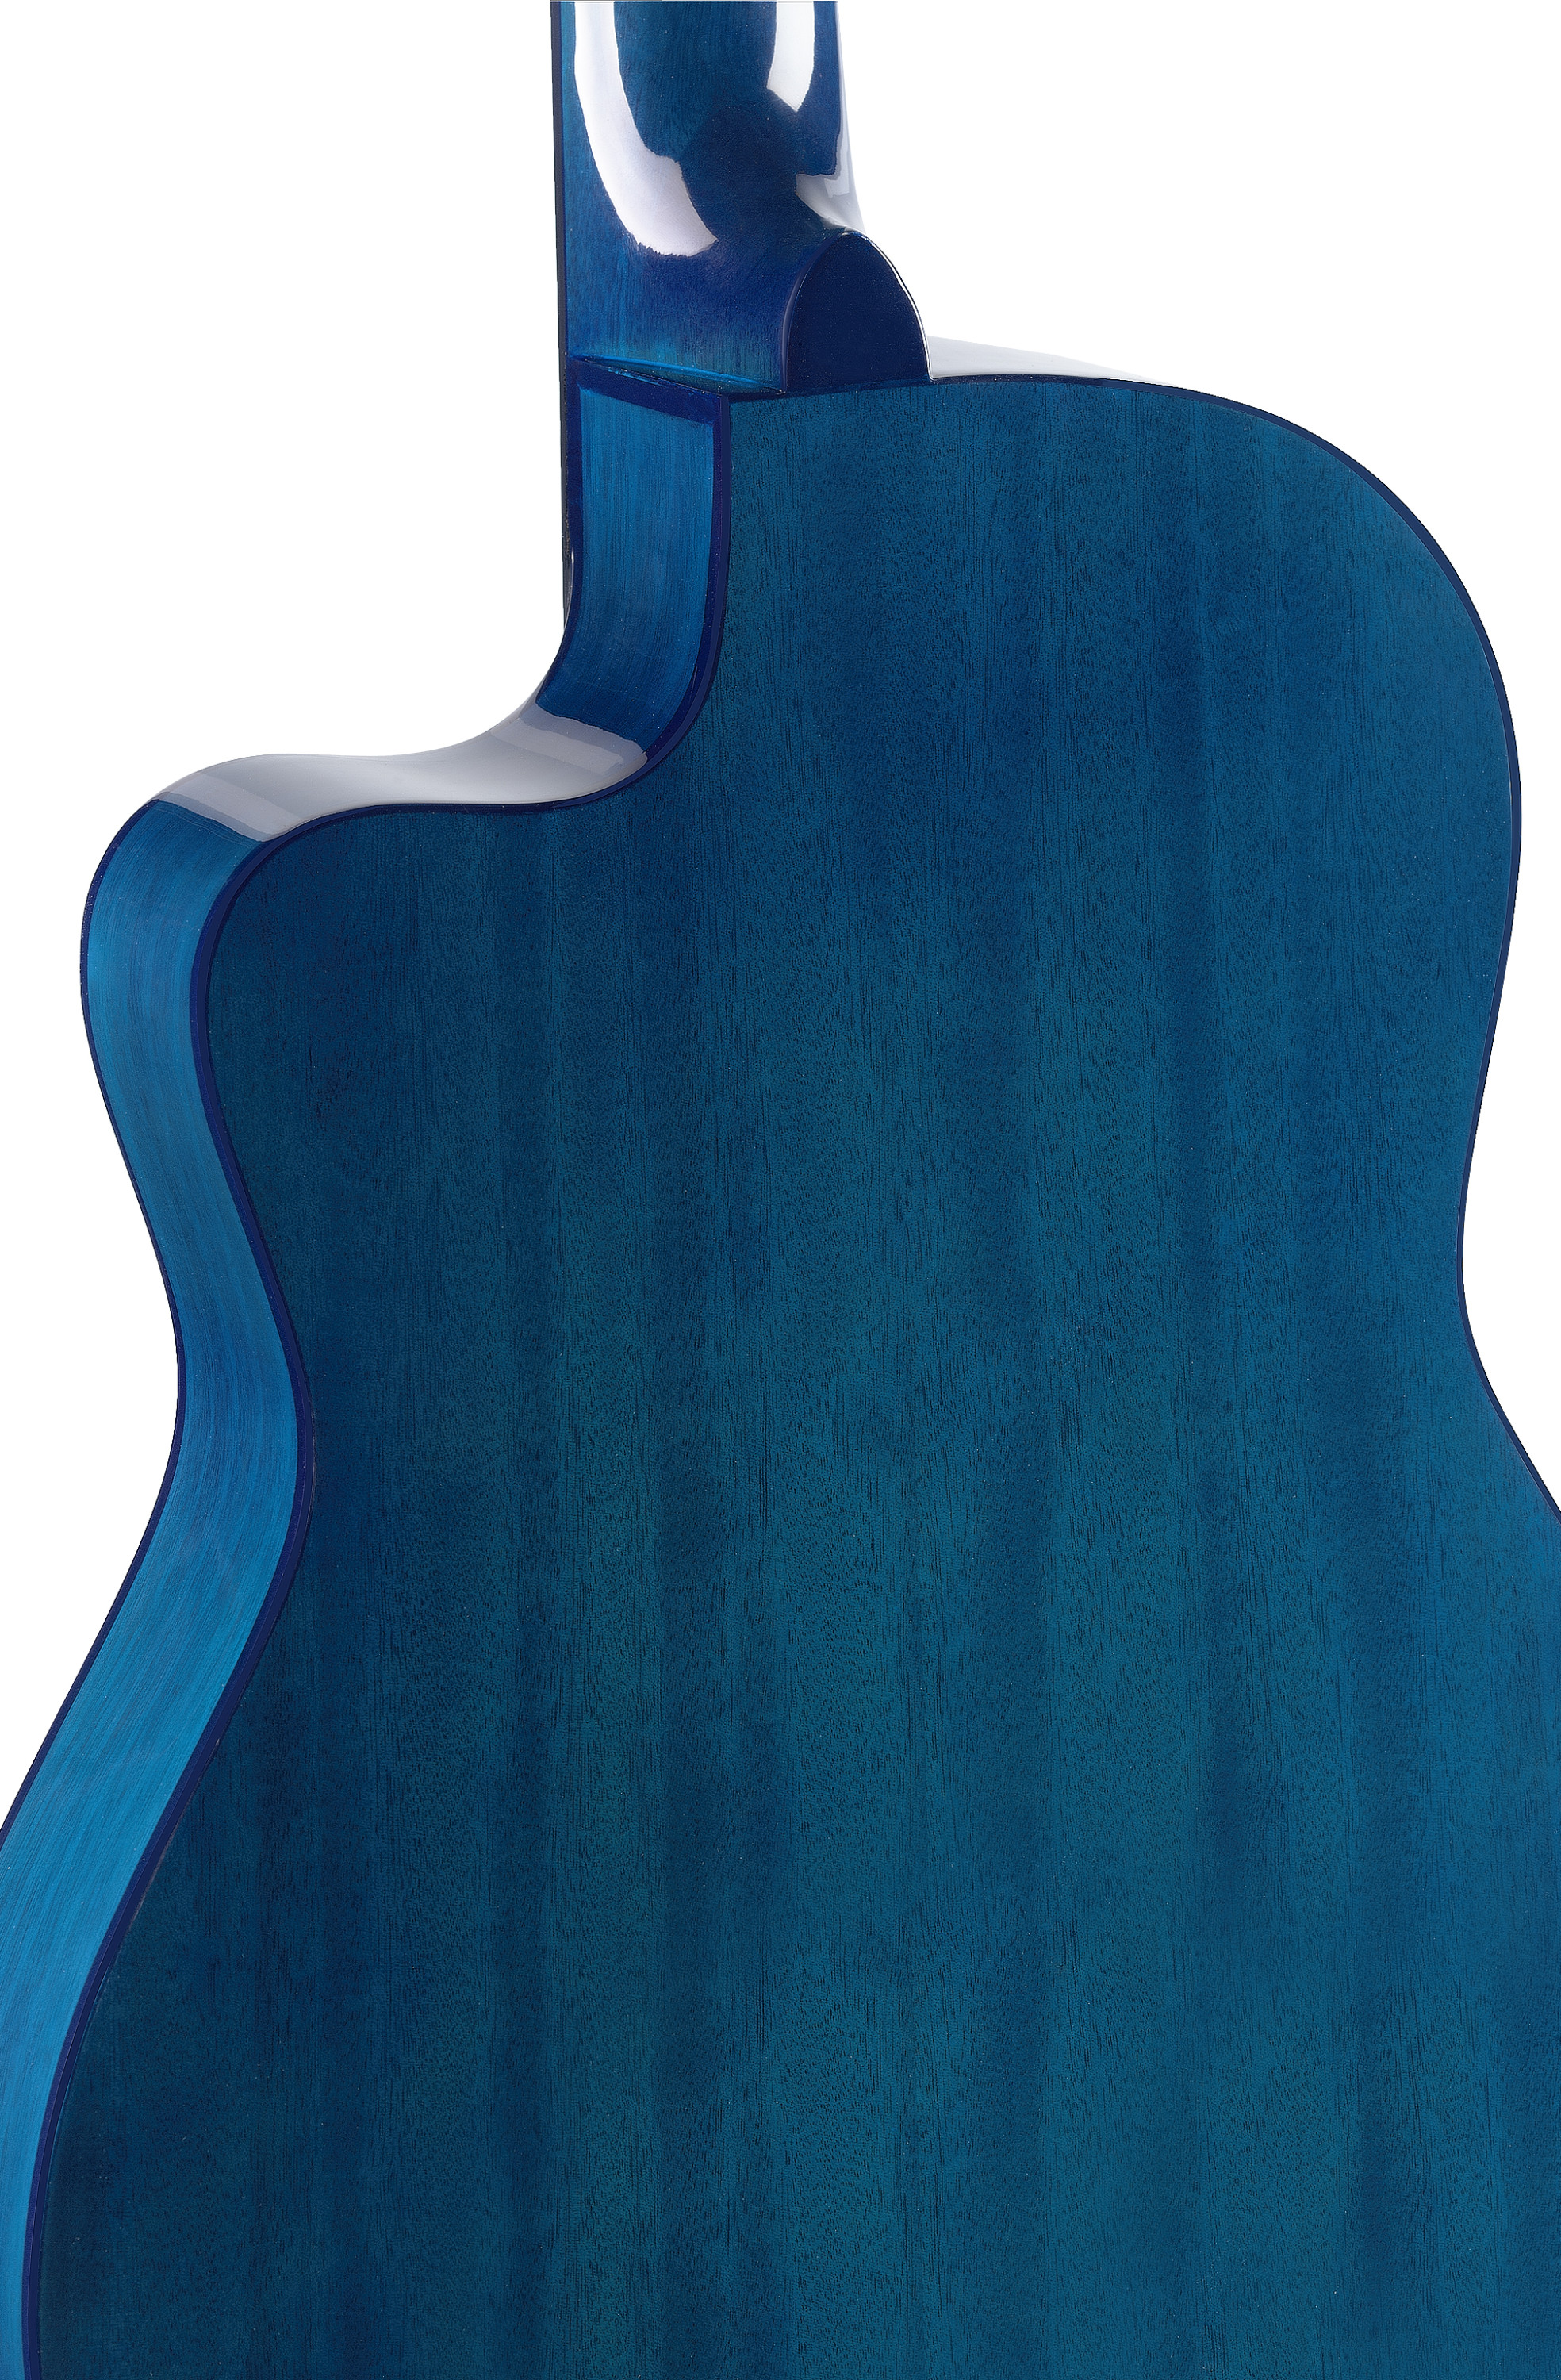 Stagg C546tce Bls Cw Epicea Catalpa - Blueburst - Classical guitar 4/4 size - Variation 1